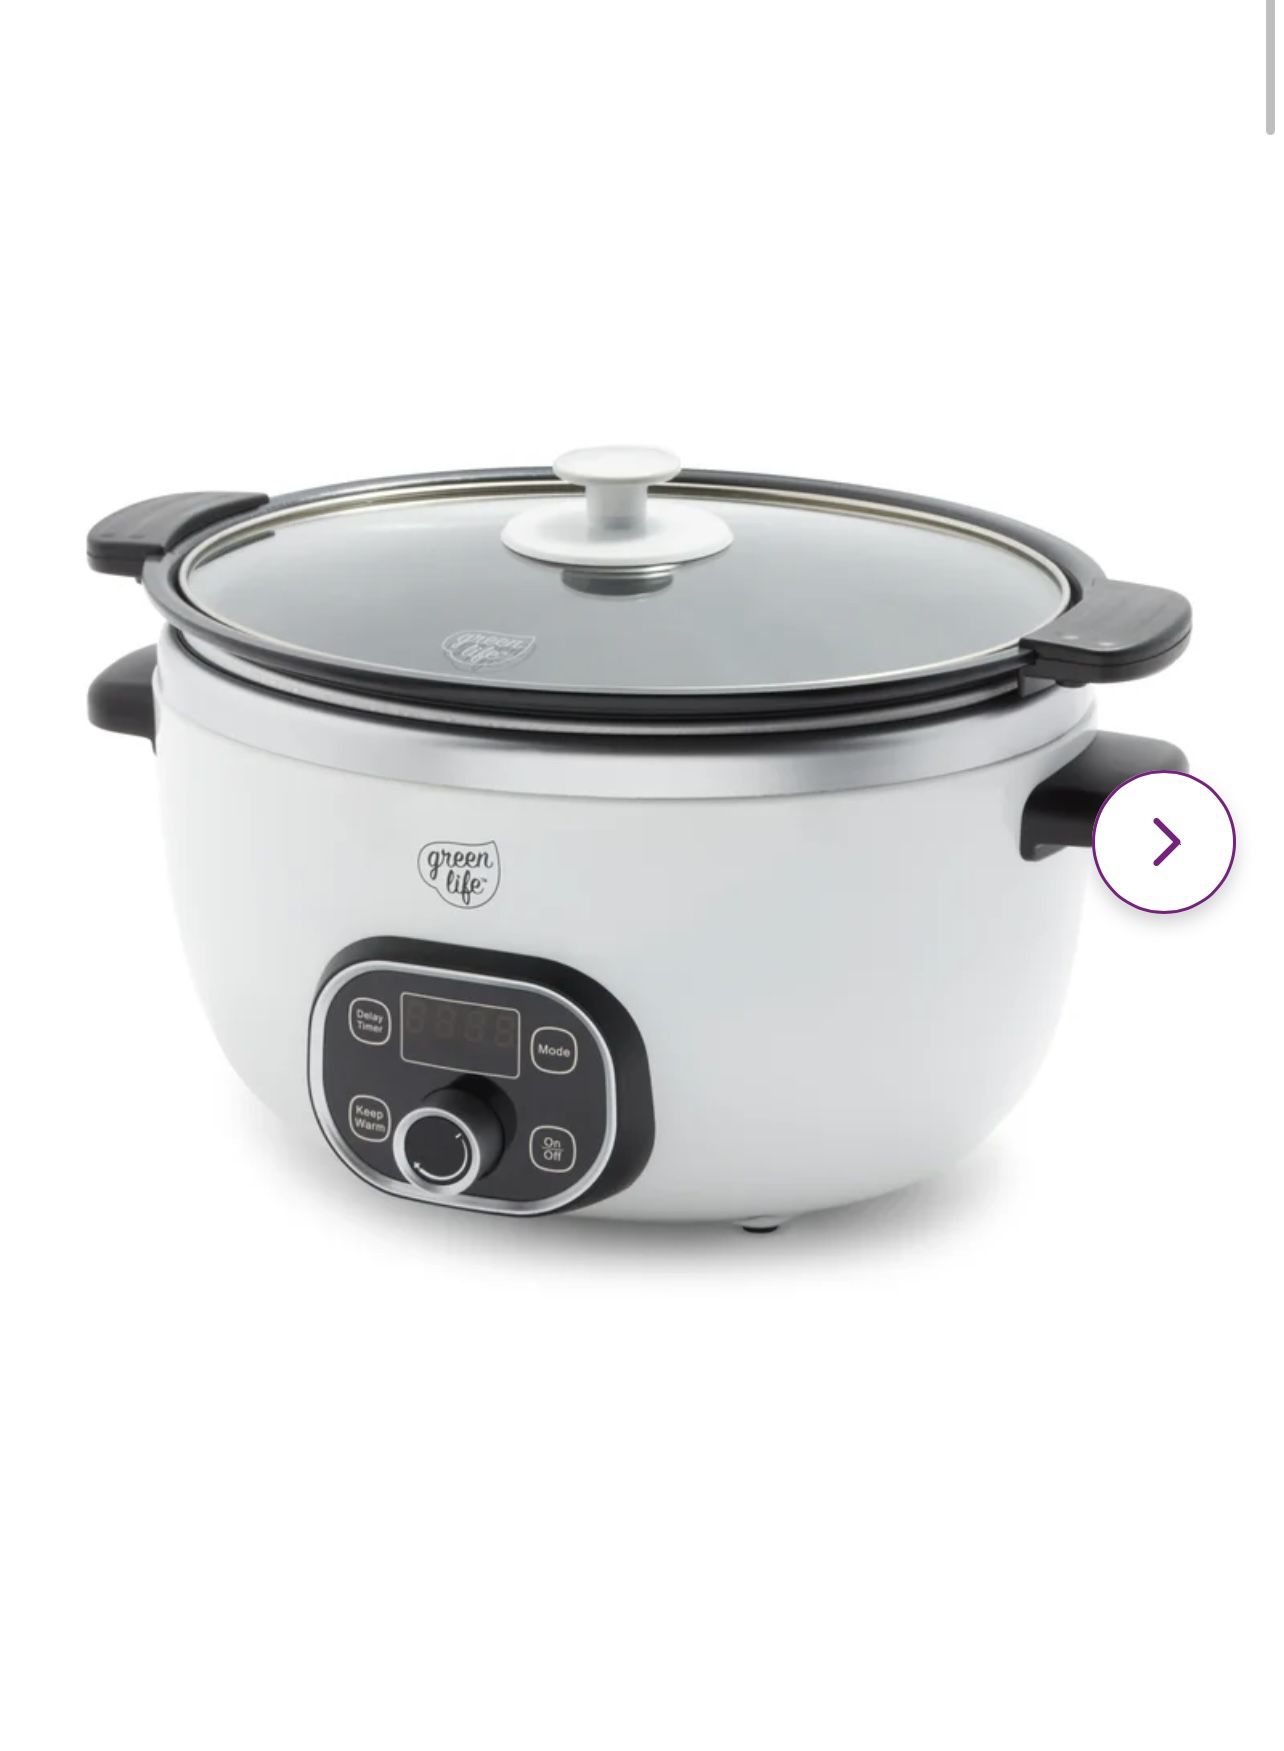 GreenLife Electrics Slow Cooker CC004774 for Sale in Monterey Park